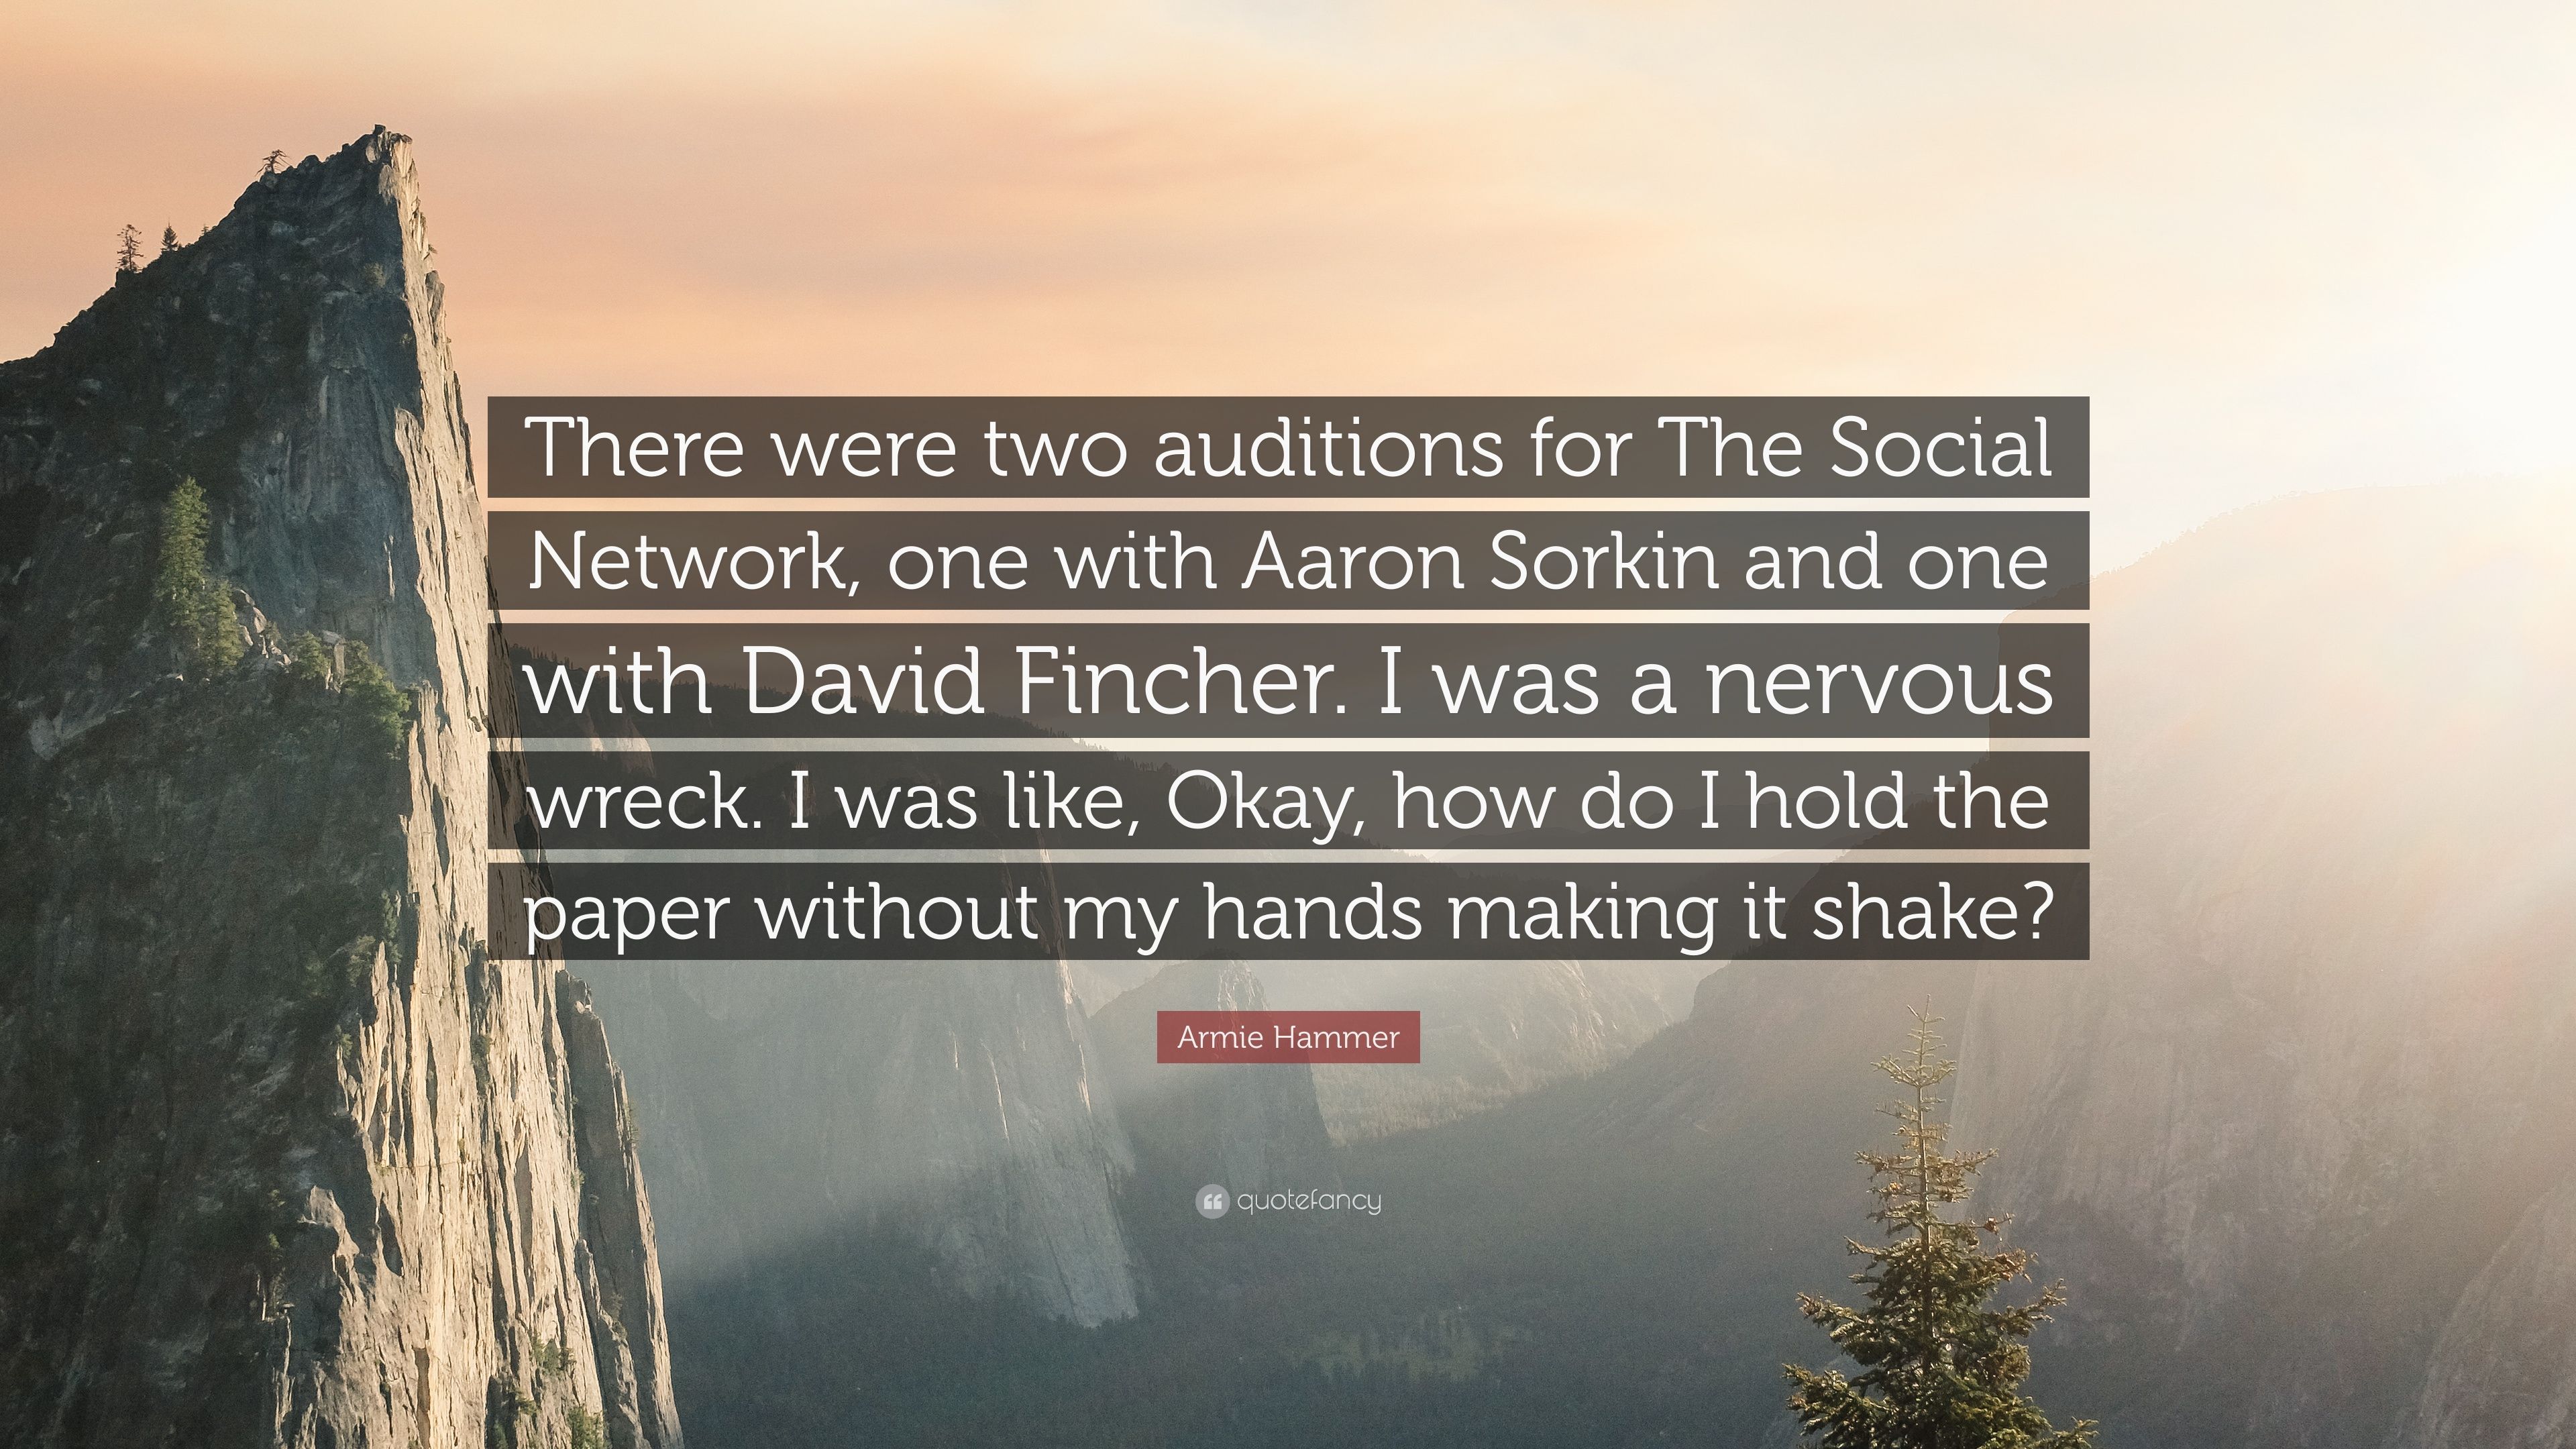 Armie Hammer Quote: “There were two auditions for The Social